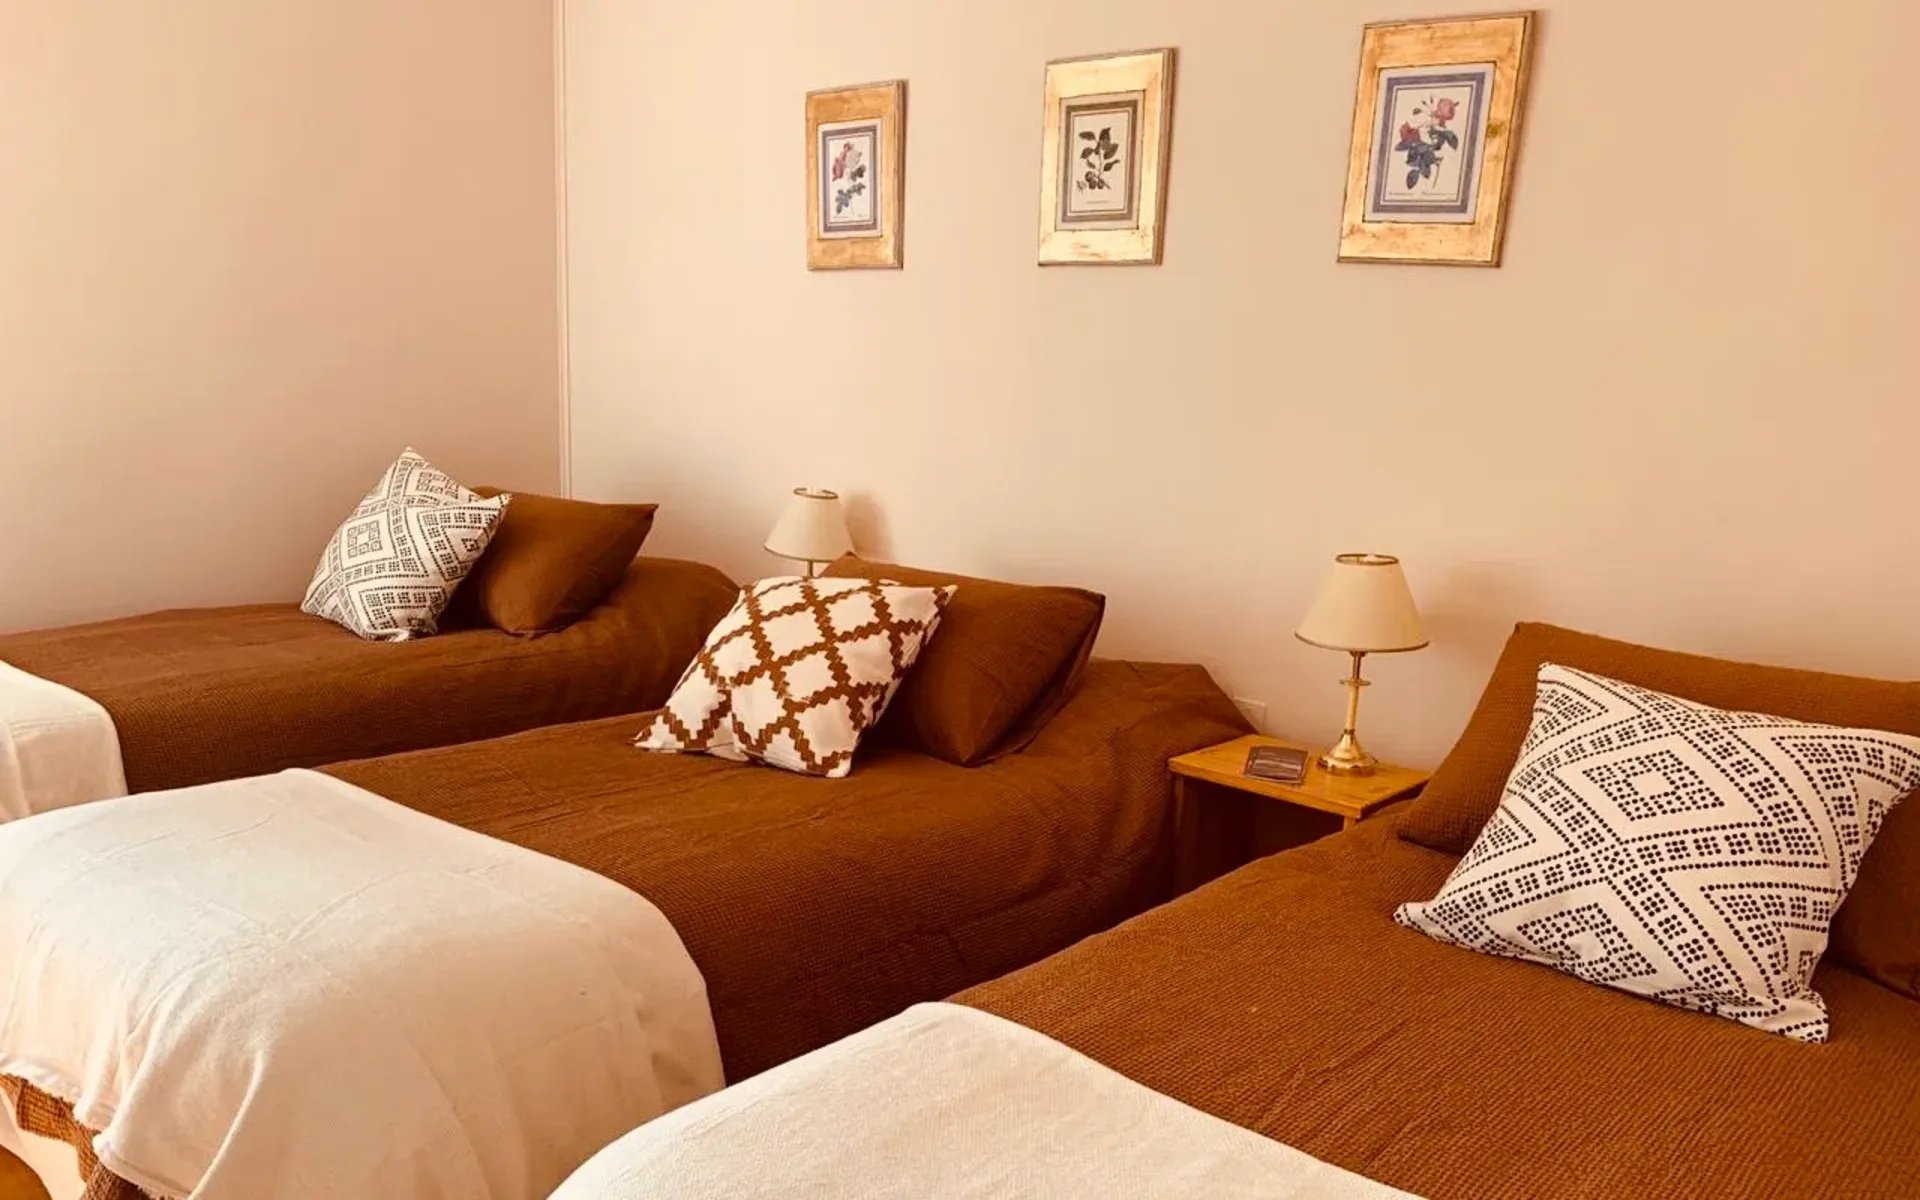 A triple room at the estancia is equipped with comfy beds dressed with chocolate-brown bedding and decorated in a simple style. 